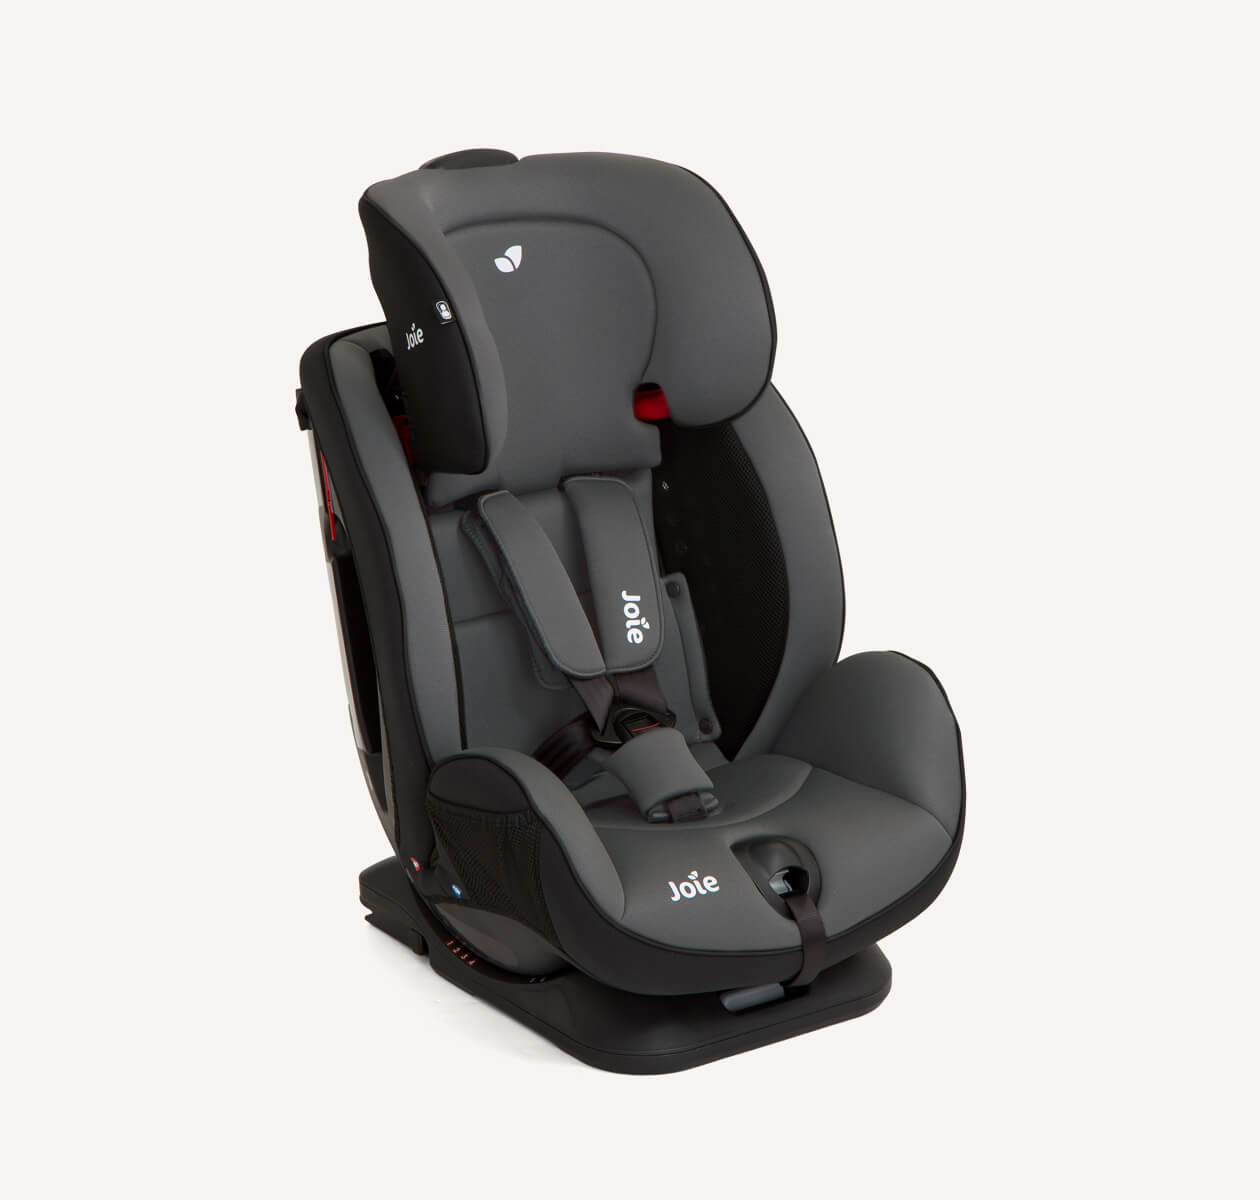 stages™ FX Car Seats ember